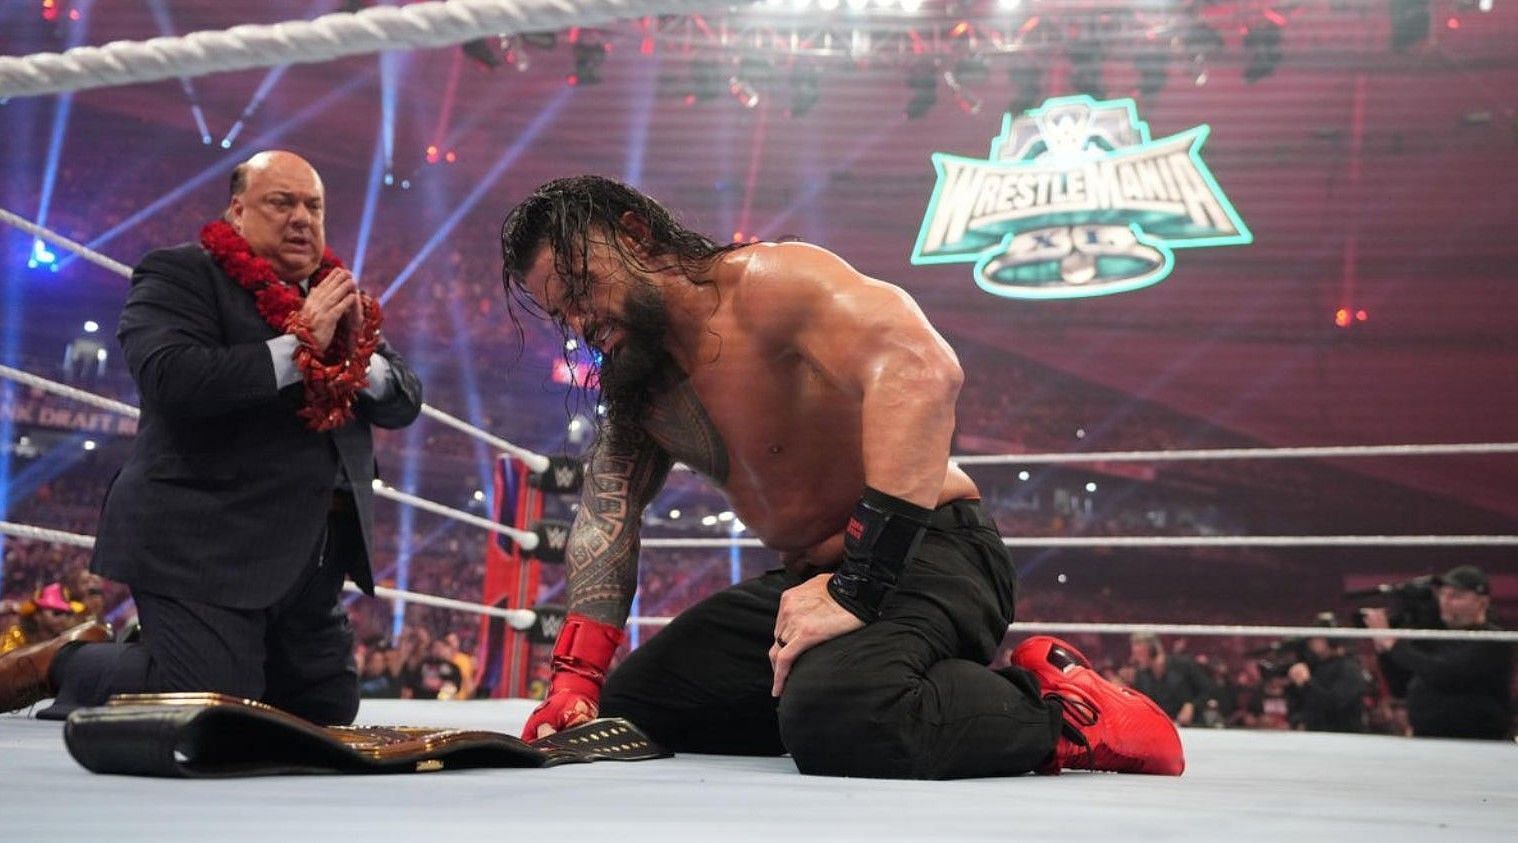 Roman Reigns successfully retained his Undisputed Universal Championship at Royal Rumble (IMAGE CREDIT: WWE.COM)